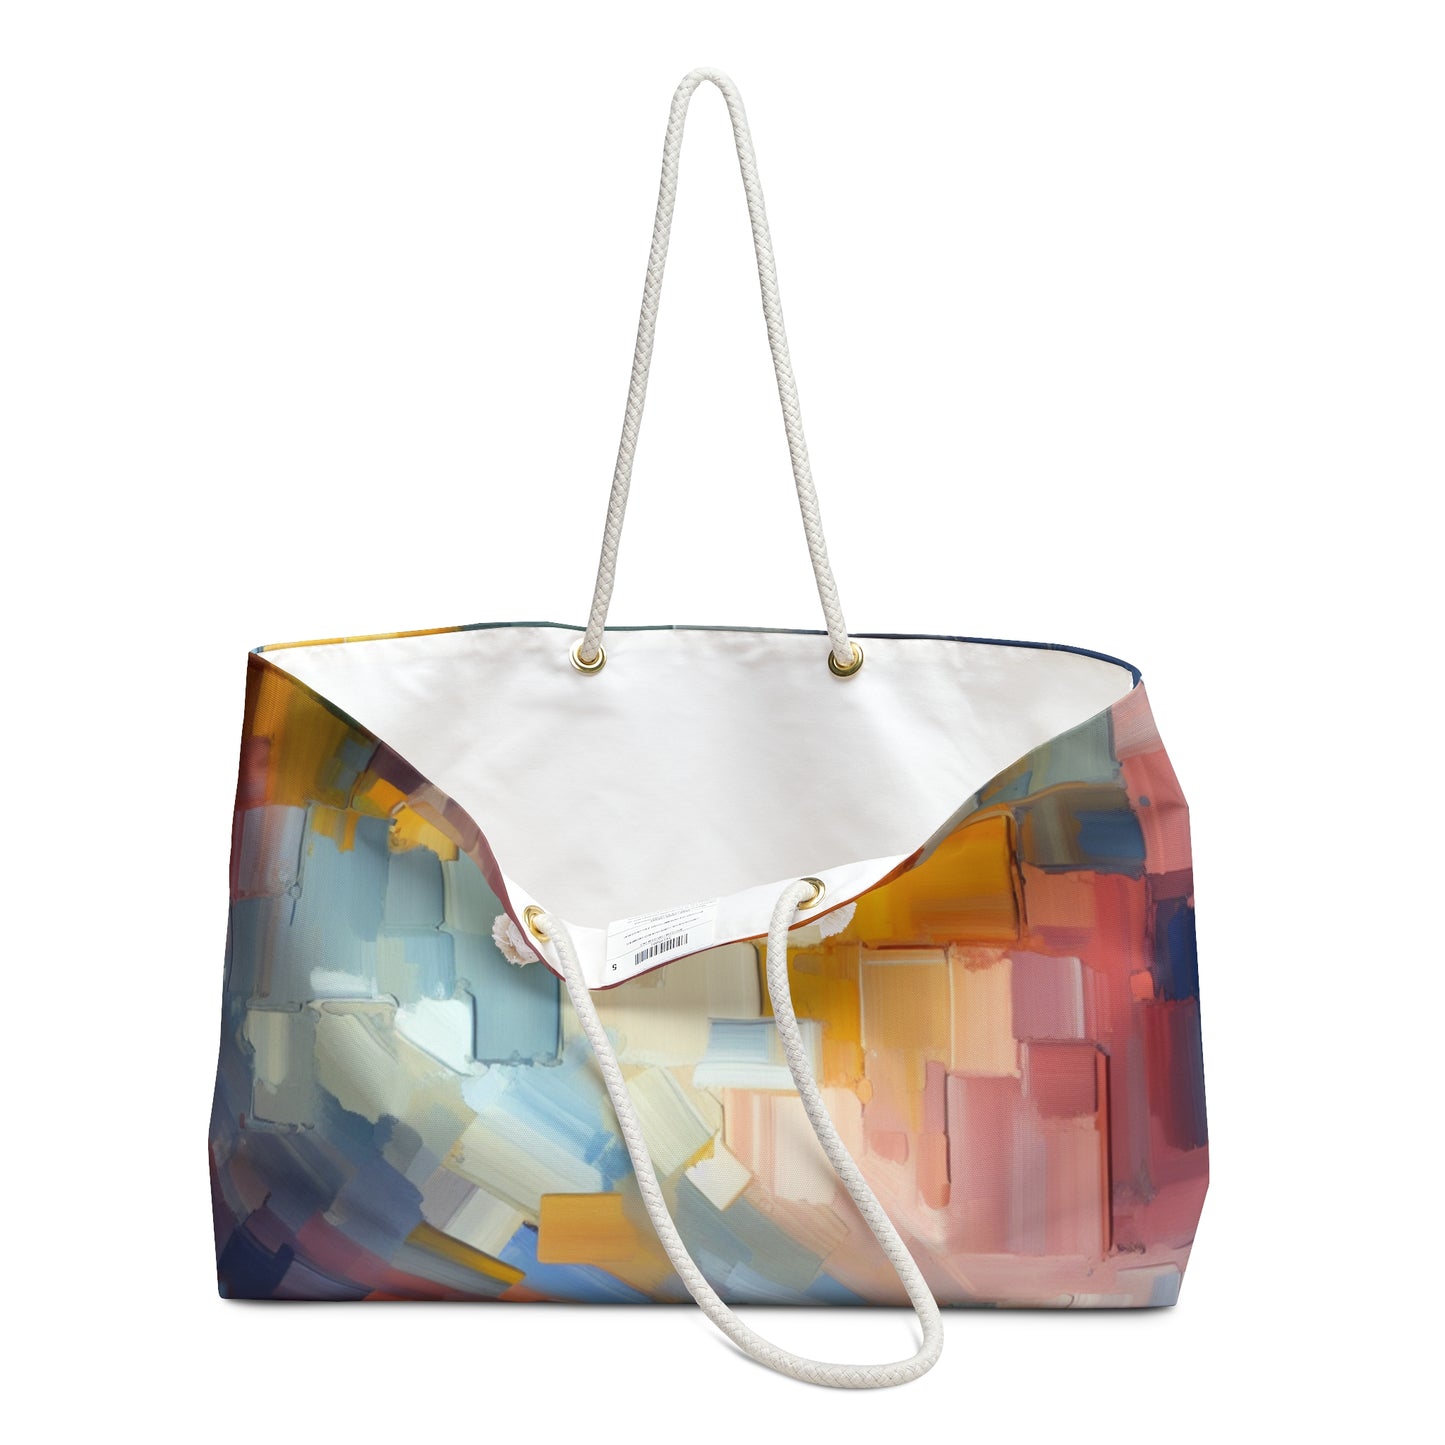 "Tranquil Sunset: A Soft Pastel Color Field Painting" - The Alien Weekender Bag Color Field Painting